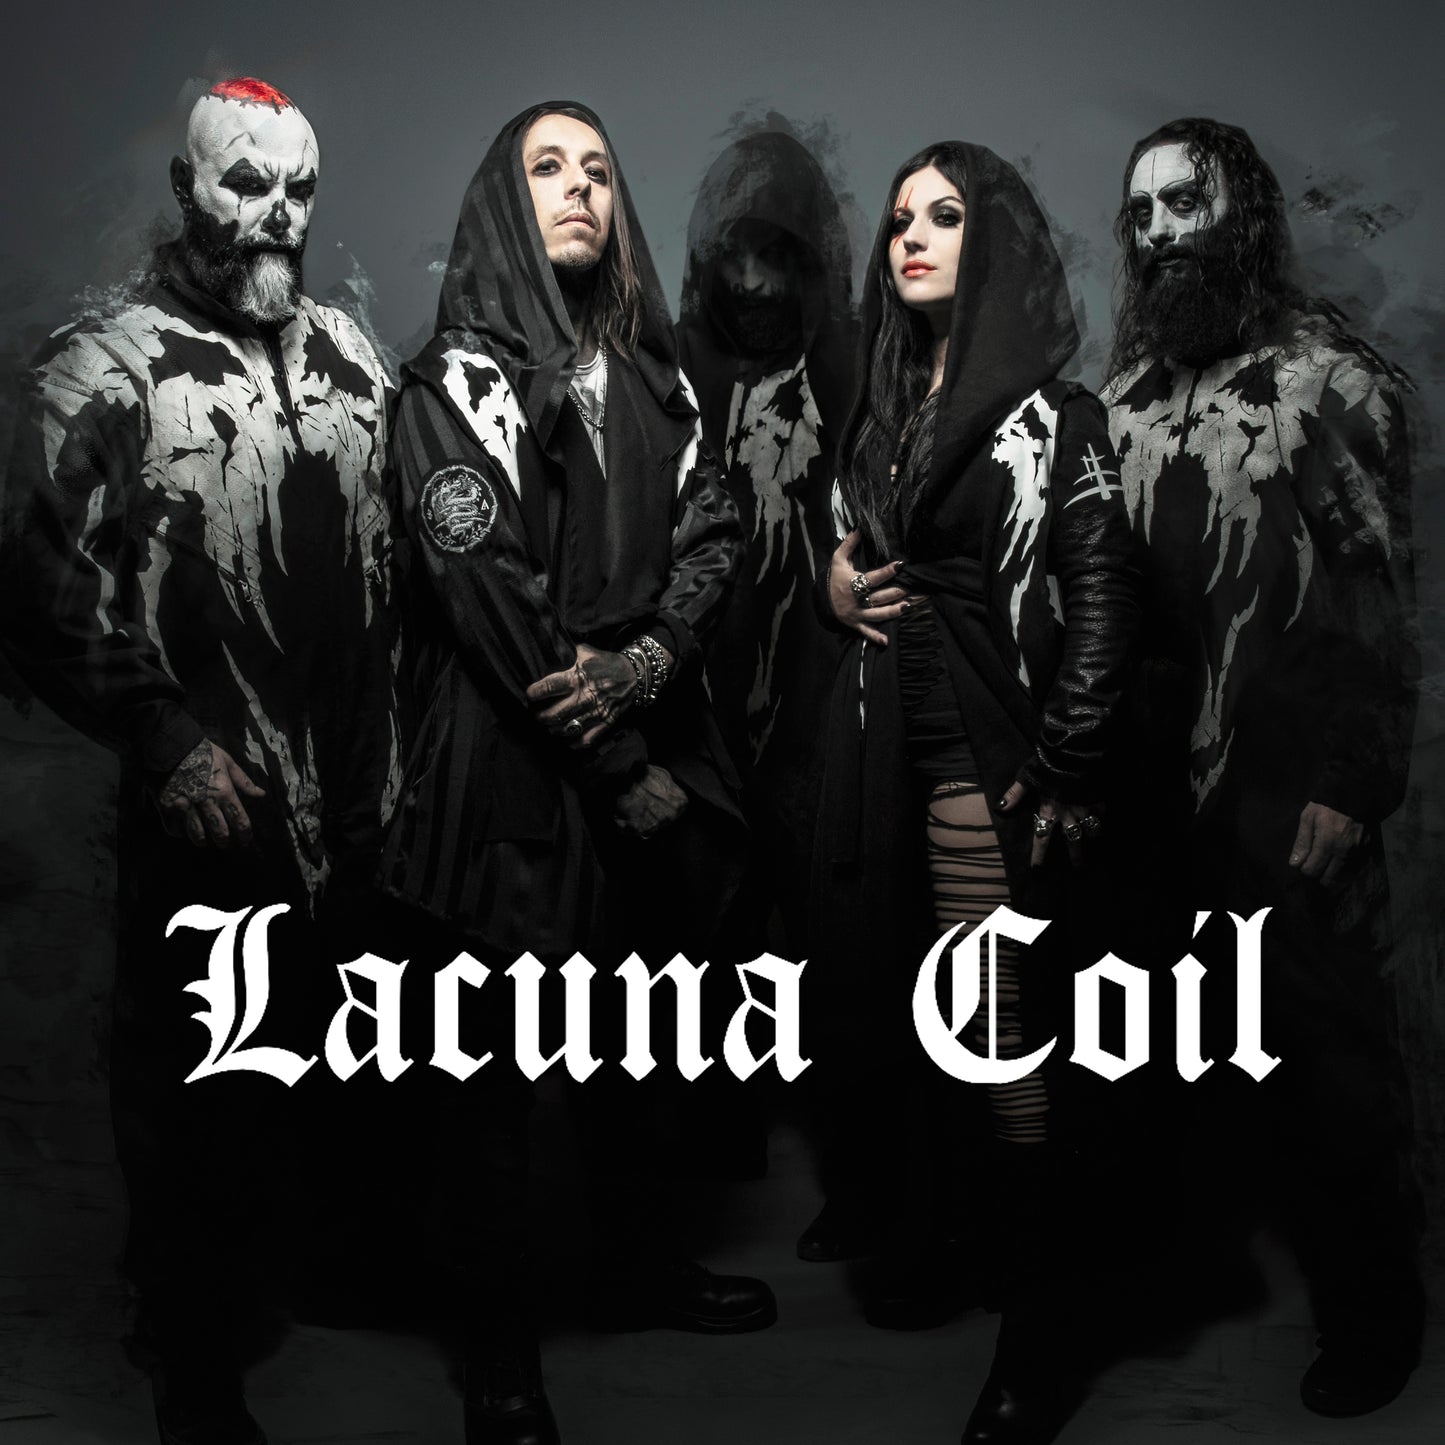 Halskette "LACUNA COIL" aus Schlagzeugbecken (Signature | Upcycling | Messing)